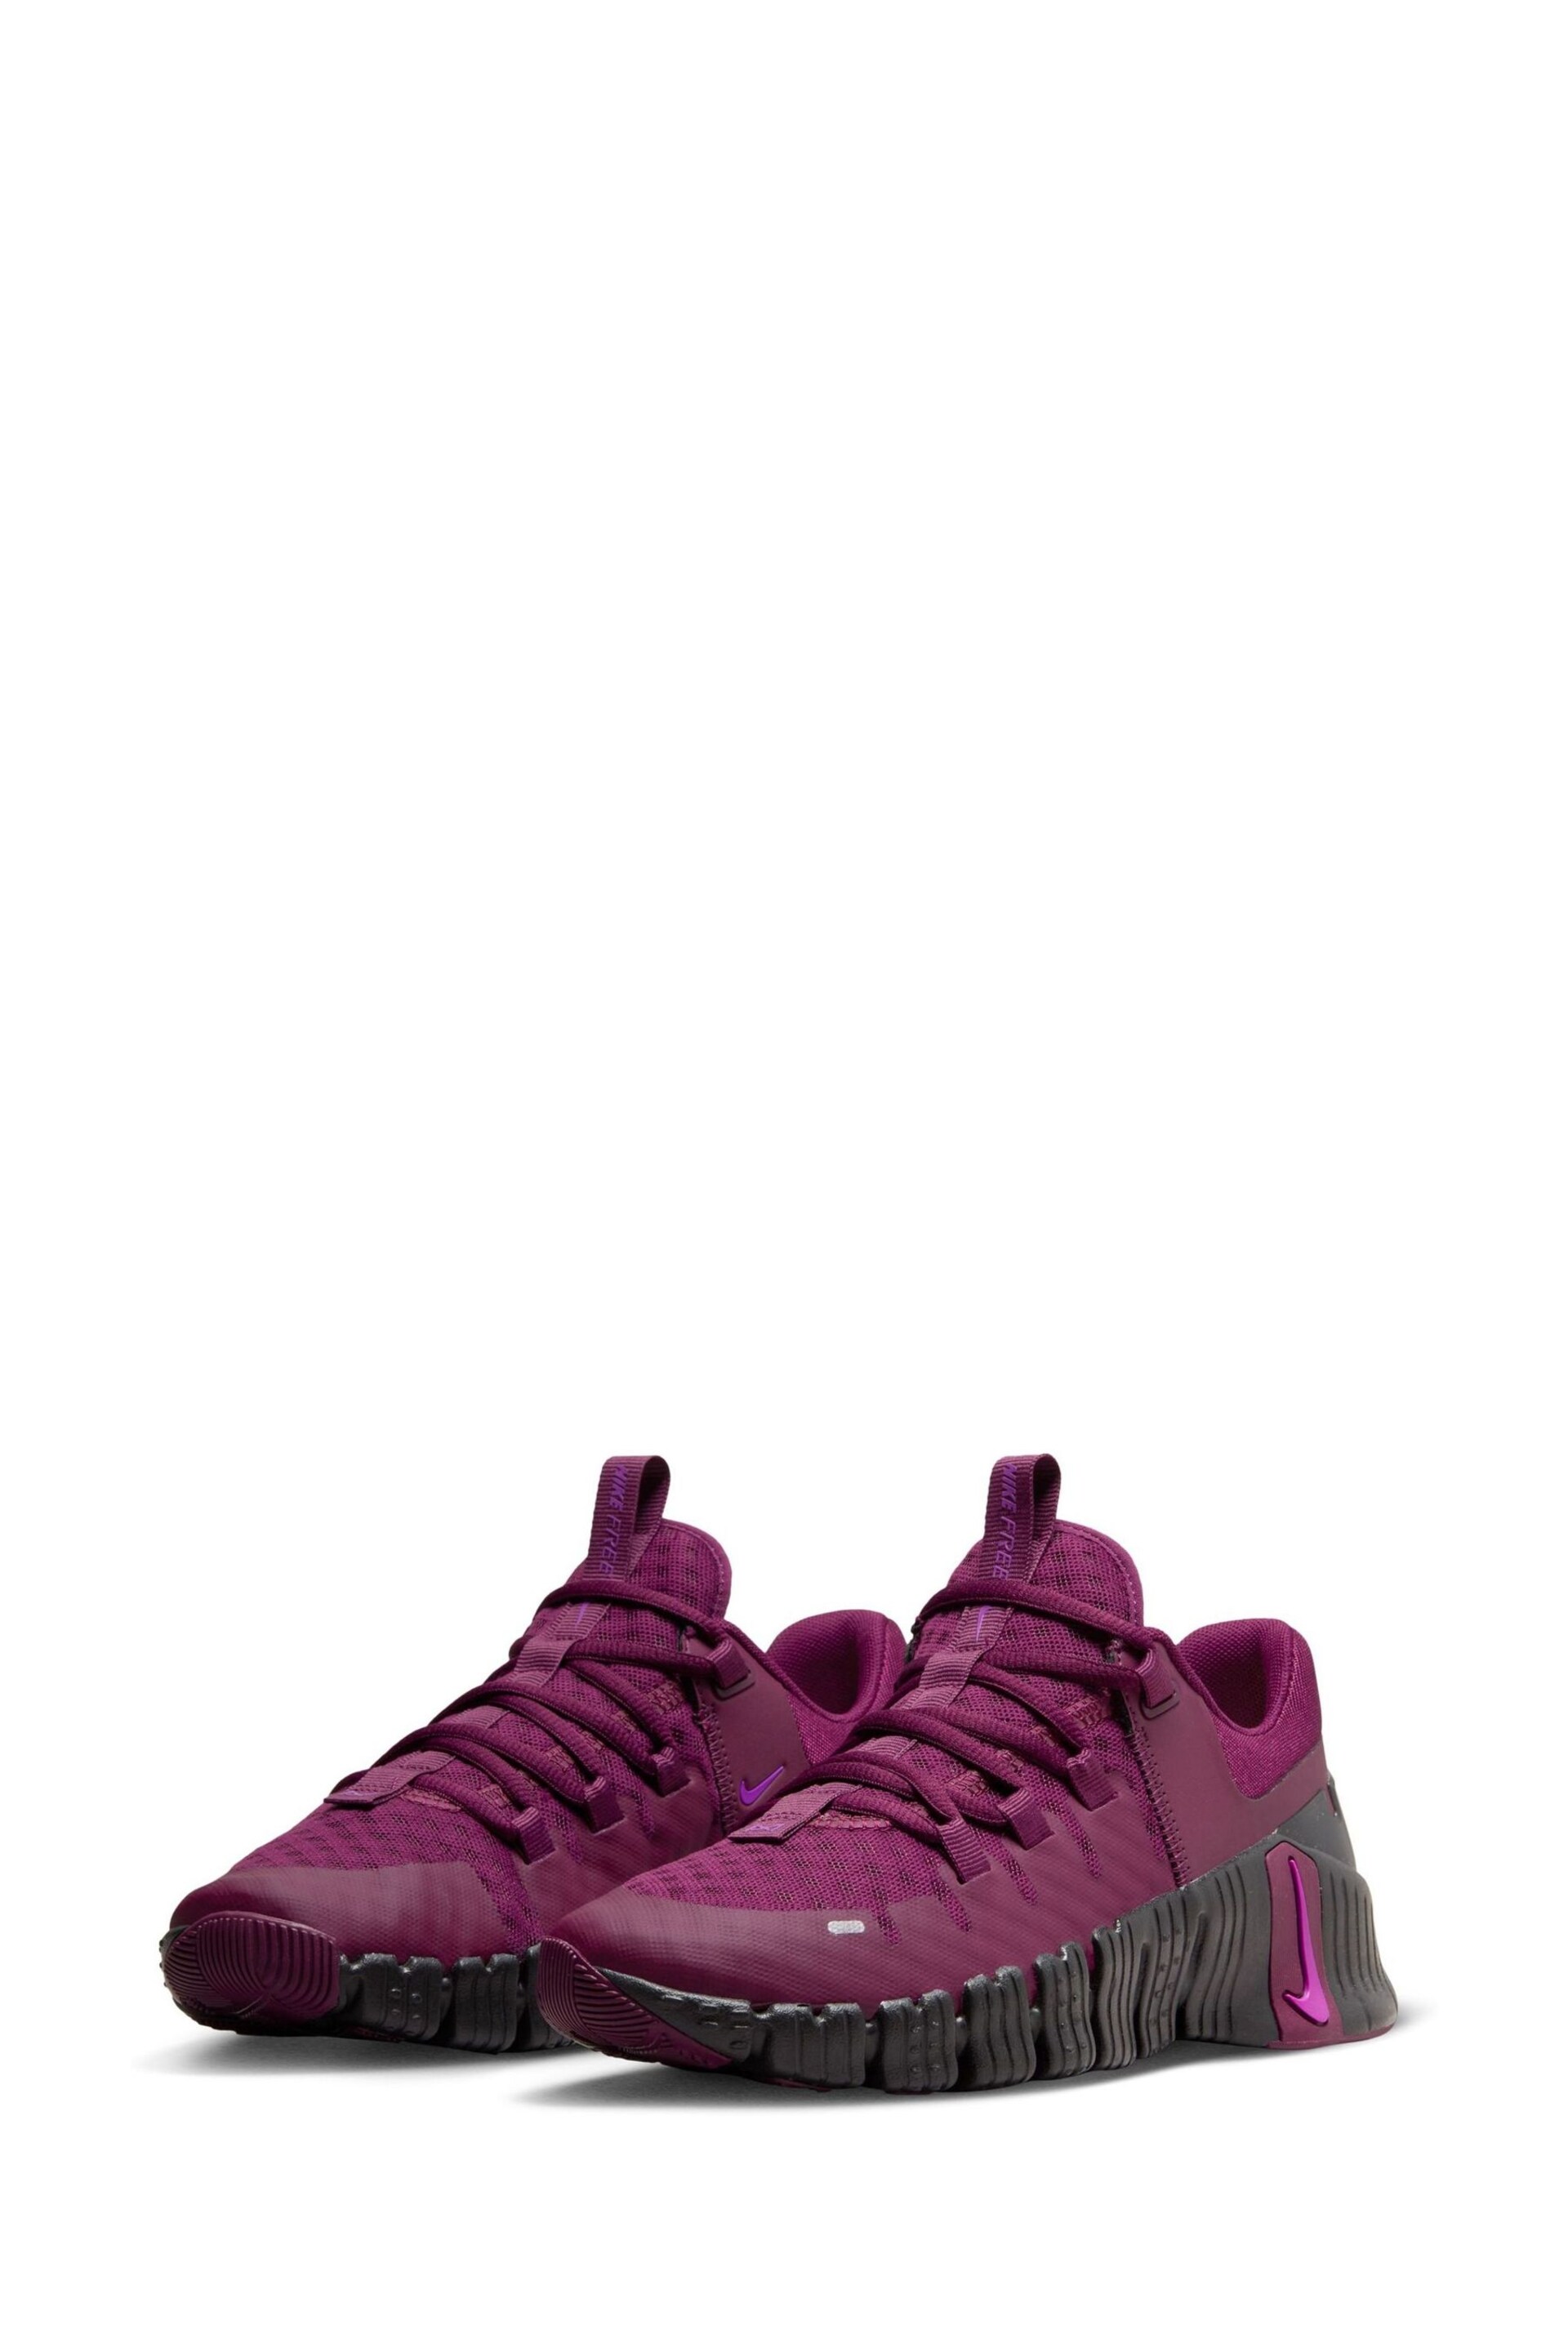 Nike Burgundy Red Free Metcon 5 Training Trainers - Image 6 of 10